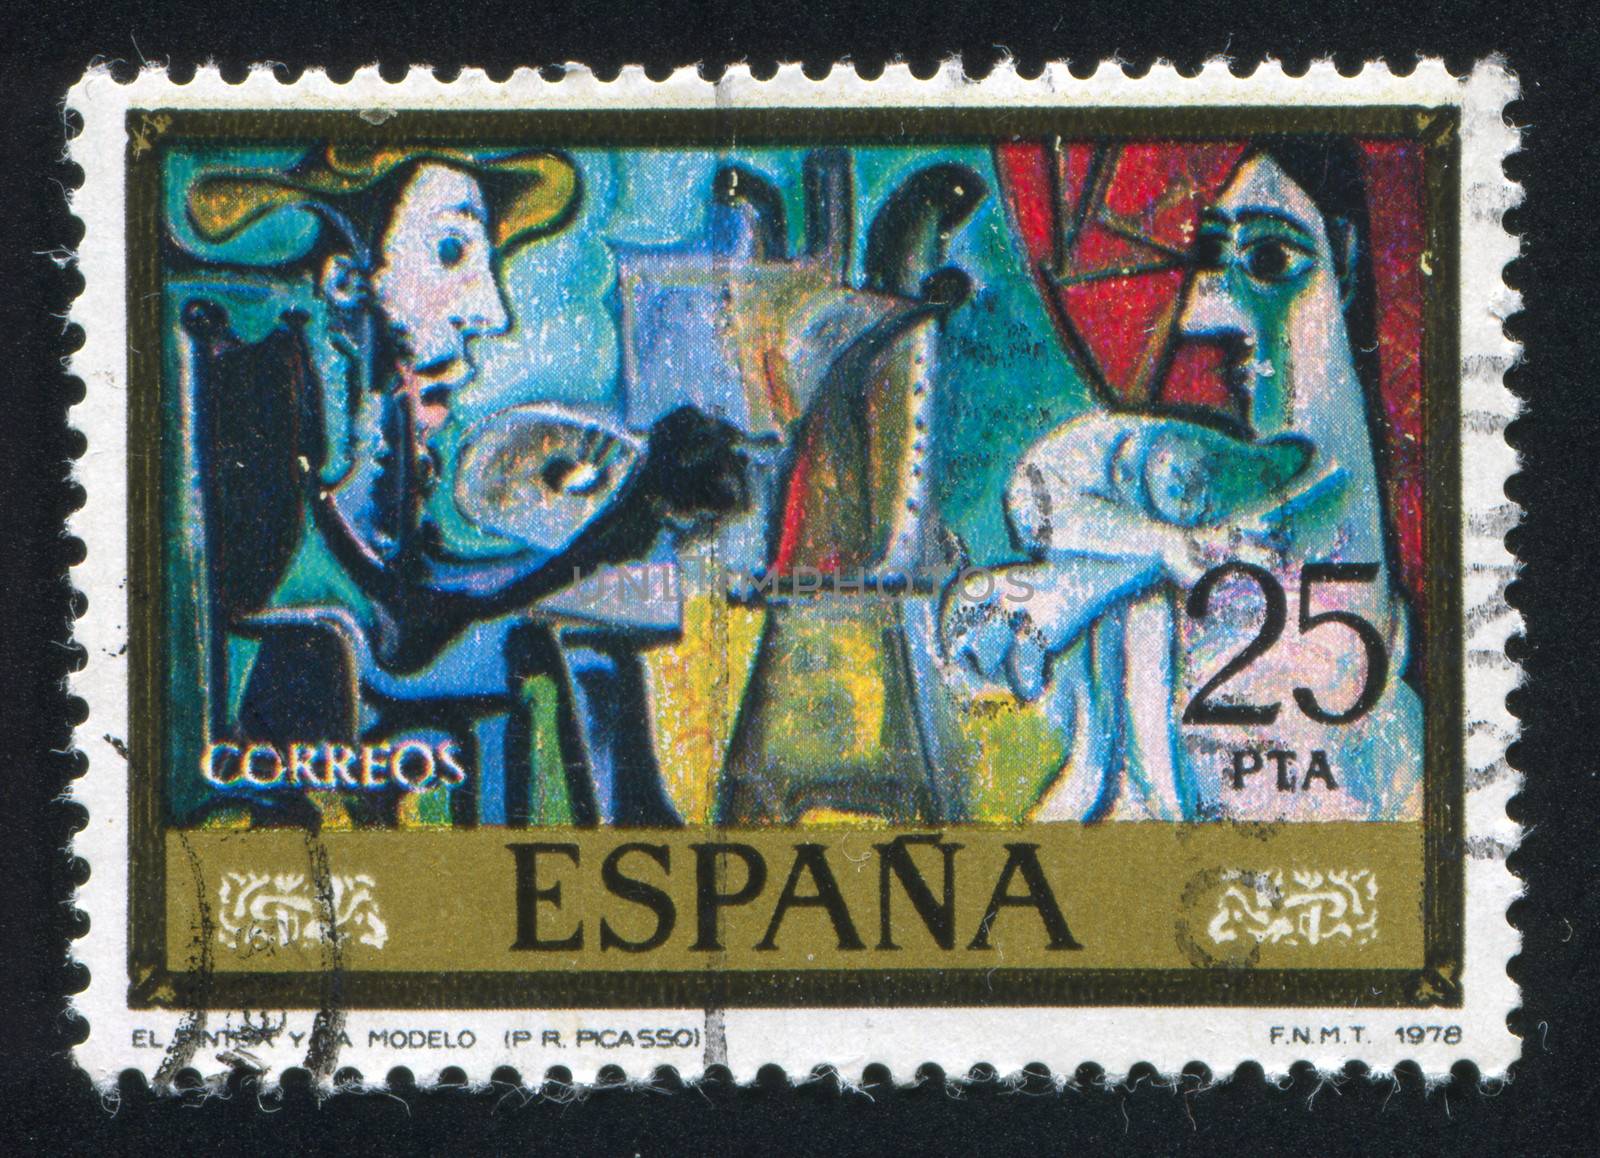 SPAIN - CIRCA 1978: stamp printed by Spain, shows Artist and model (Pablo Ruiz Picasso), circa 1978